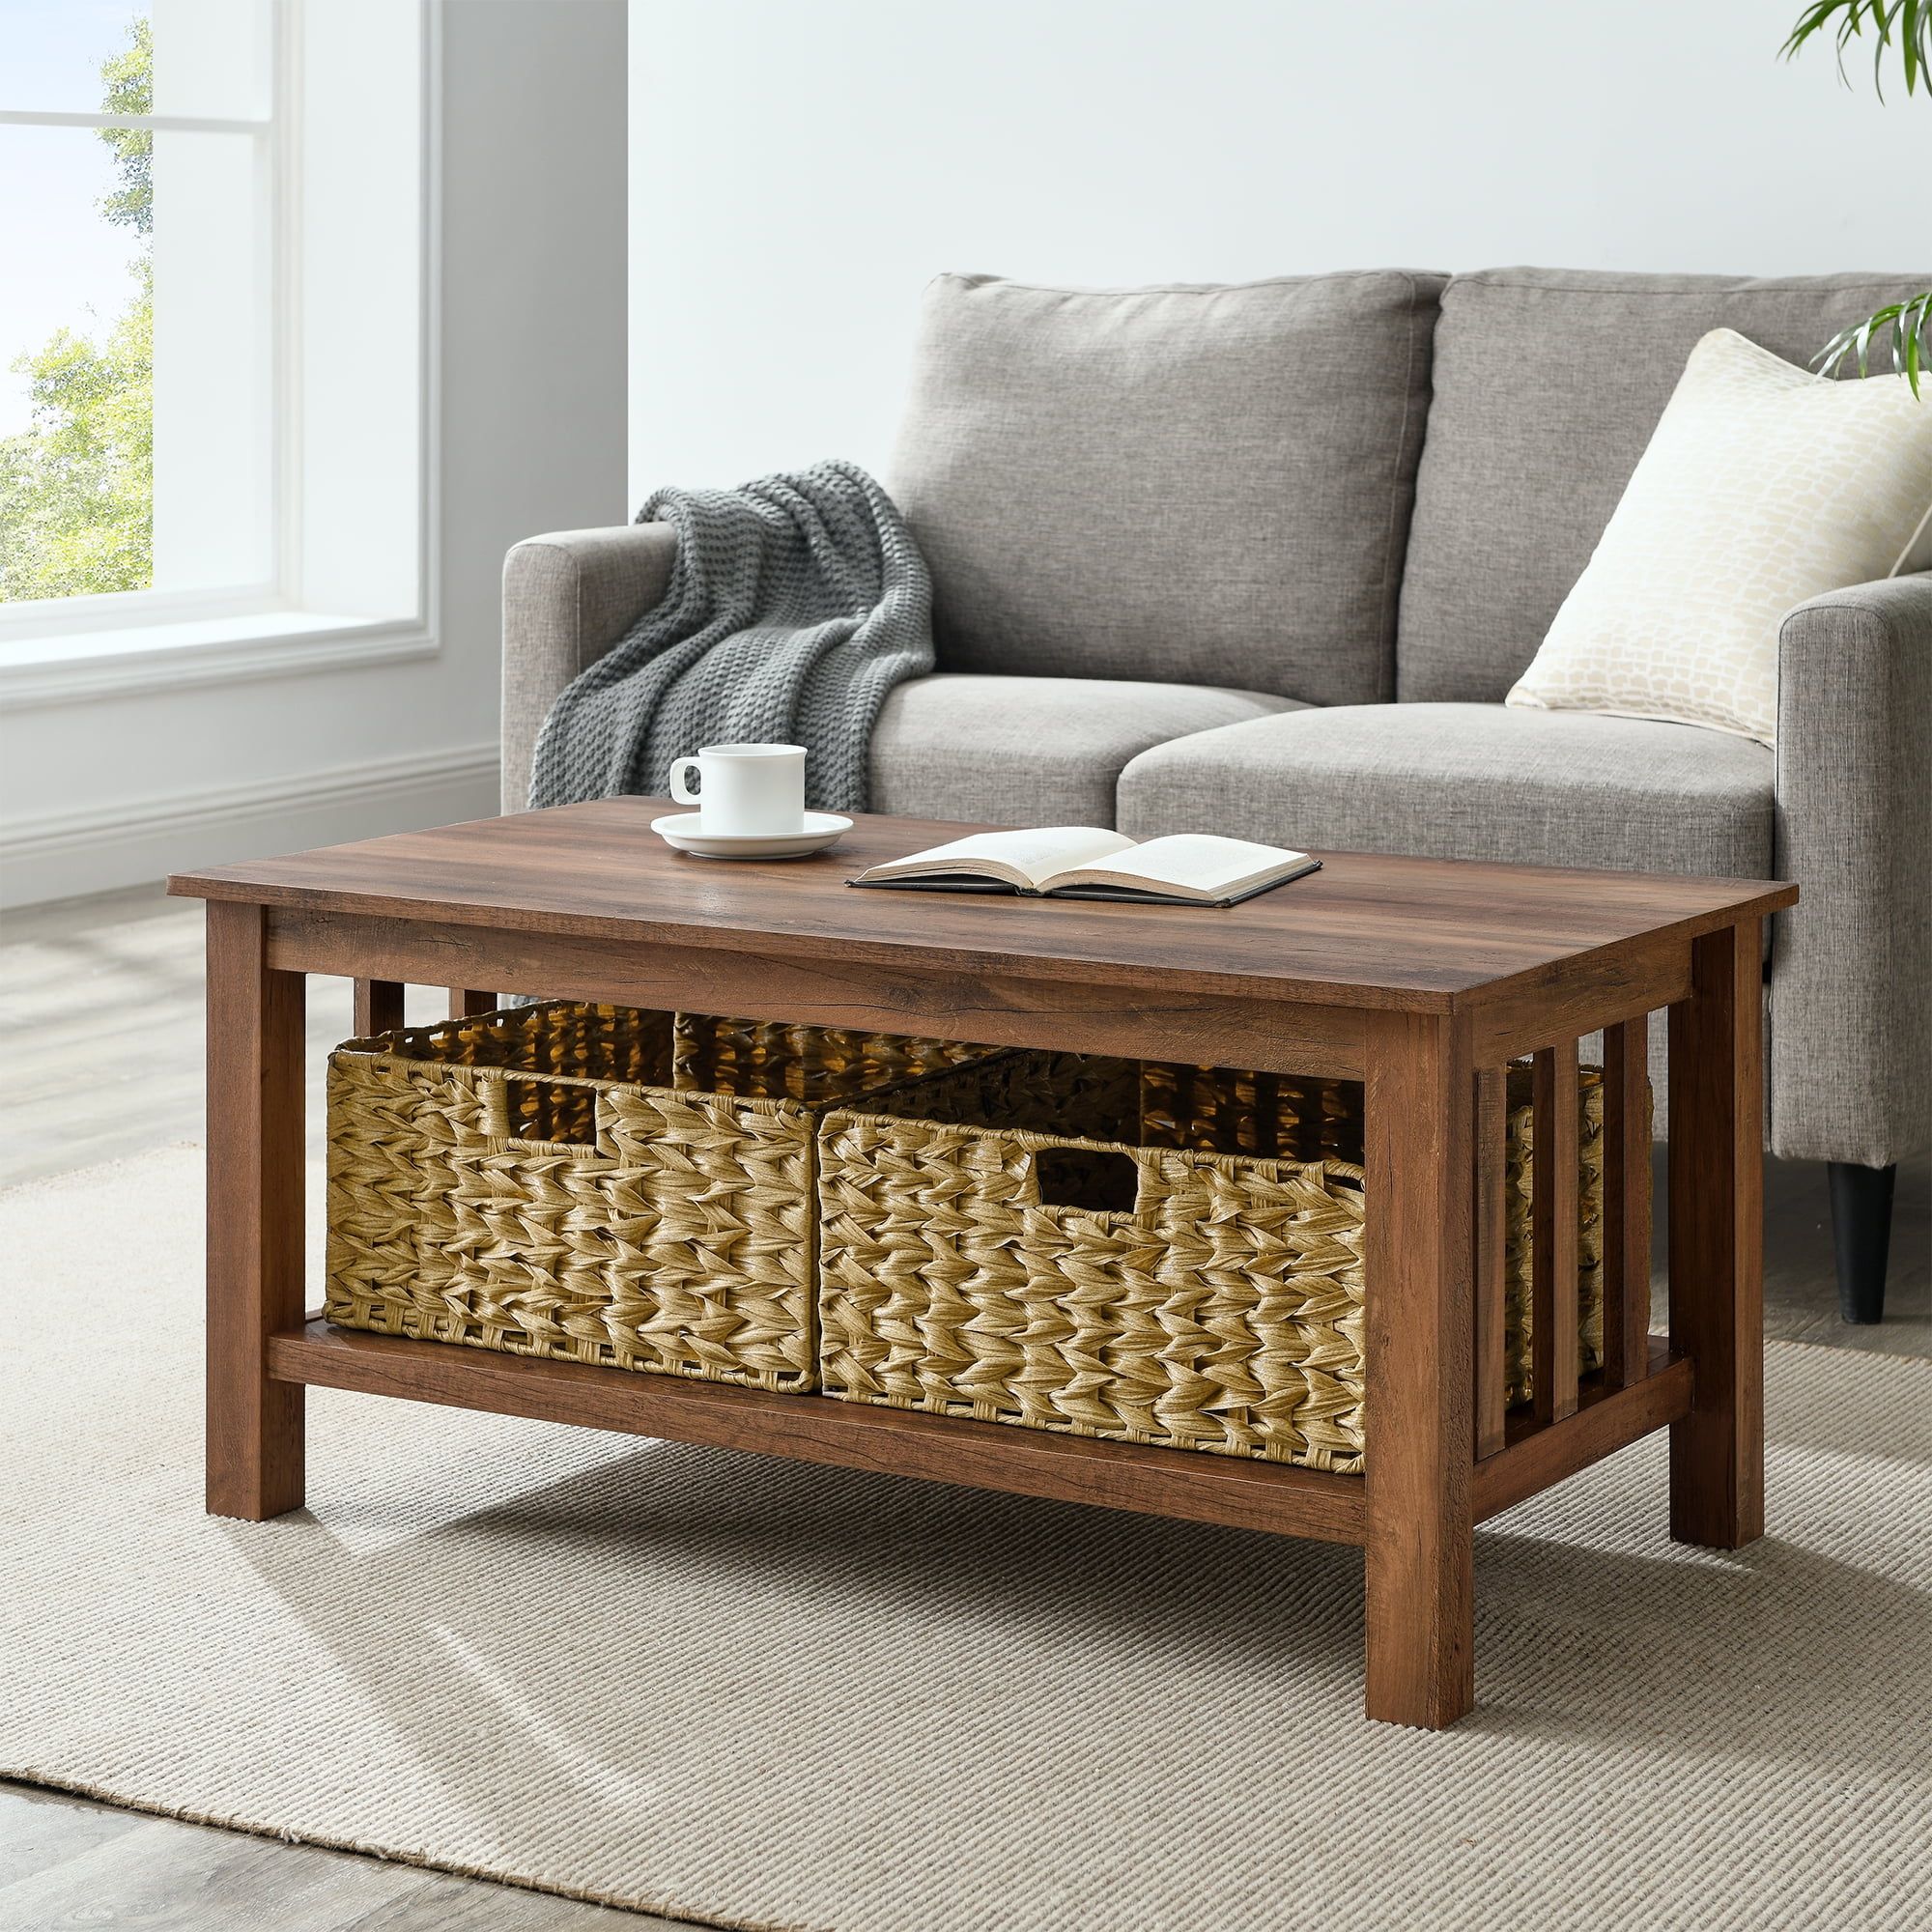 Woven Paths Farmhouse Mission Rectangle Coffee Table With Baskets,  Reclaimed Barnwood – Walmart Throughout Woven Paths Coffee Tables (View 6 of 15)